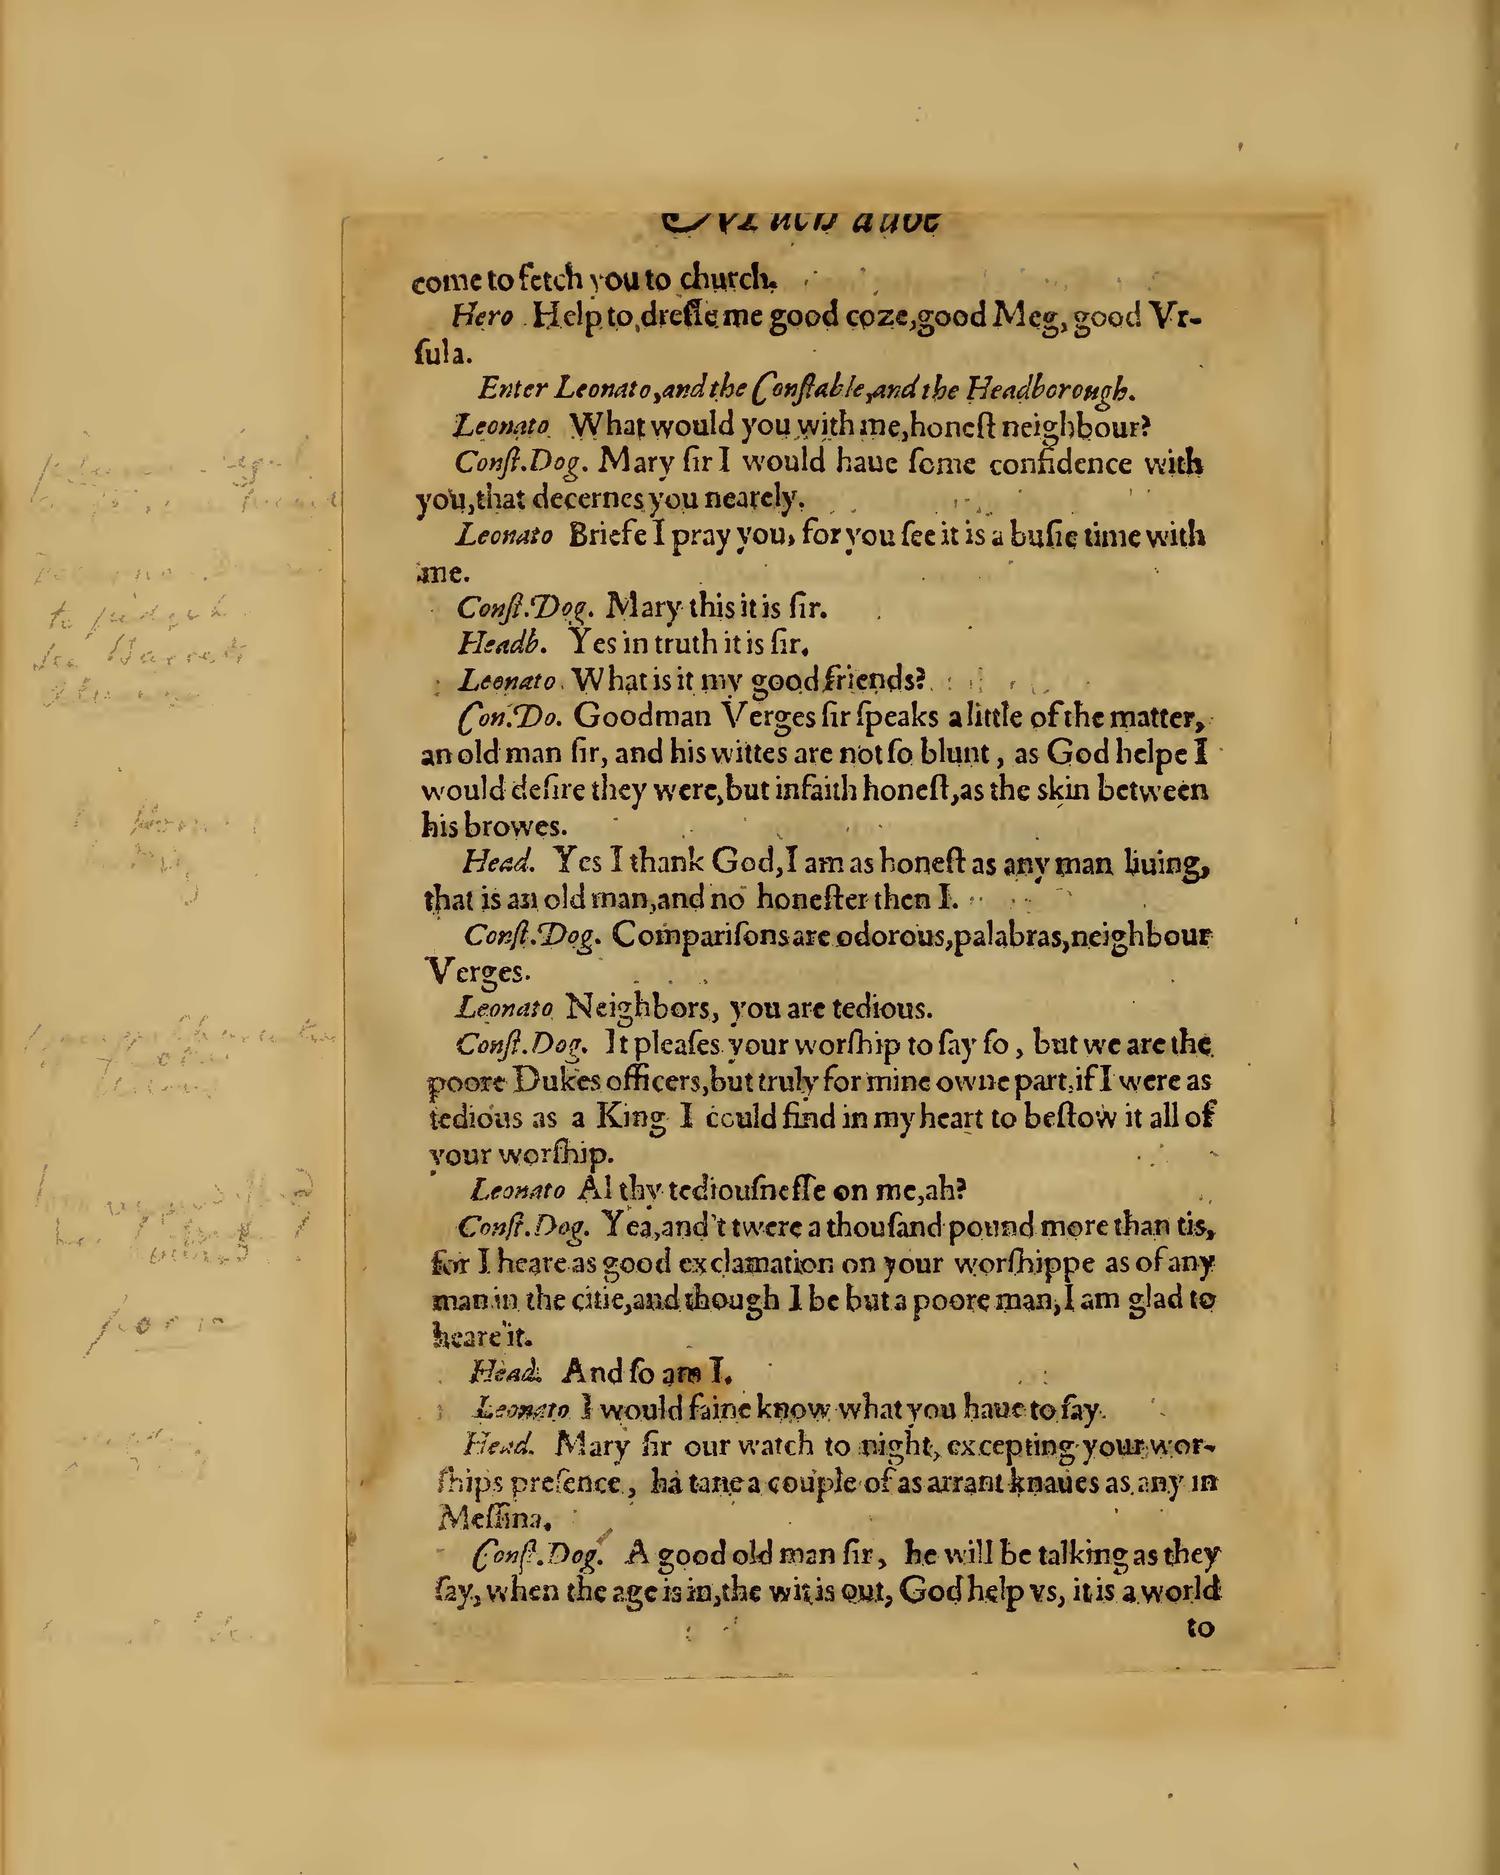 Image of page 44